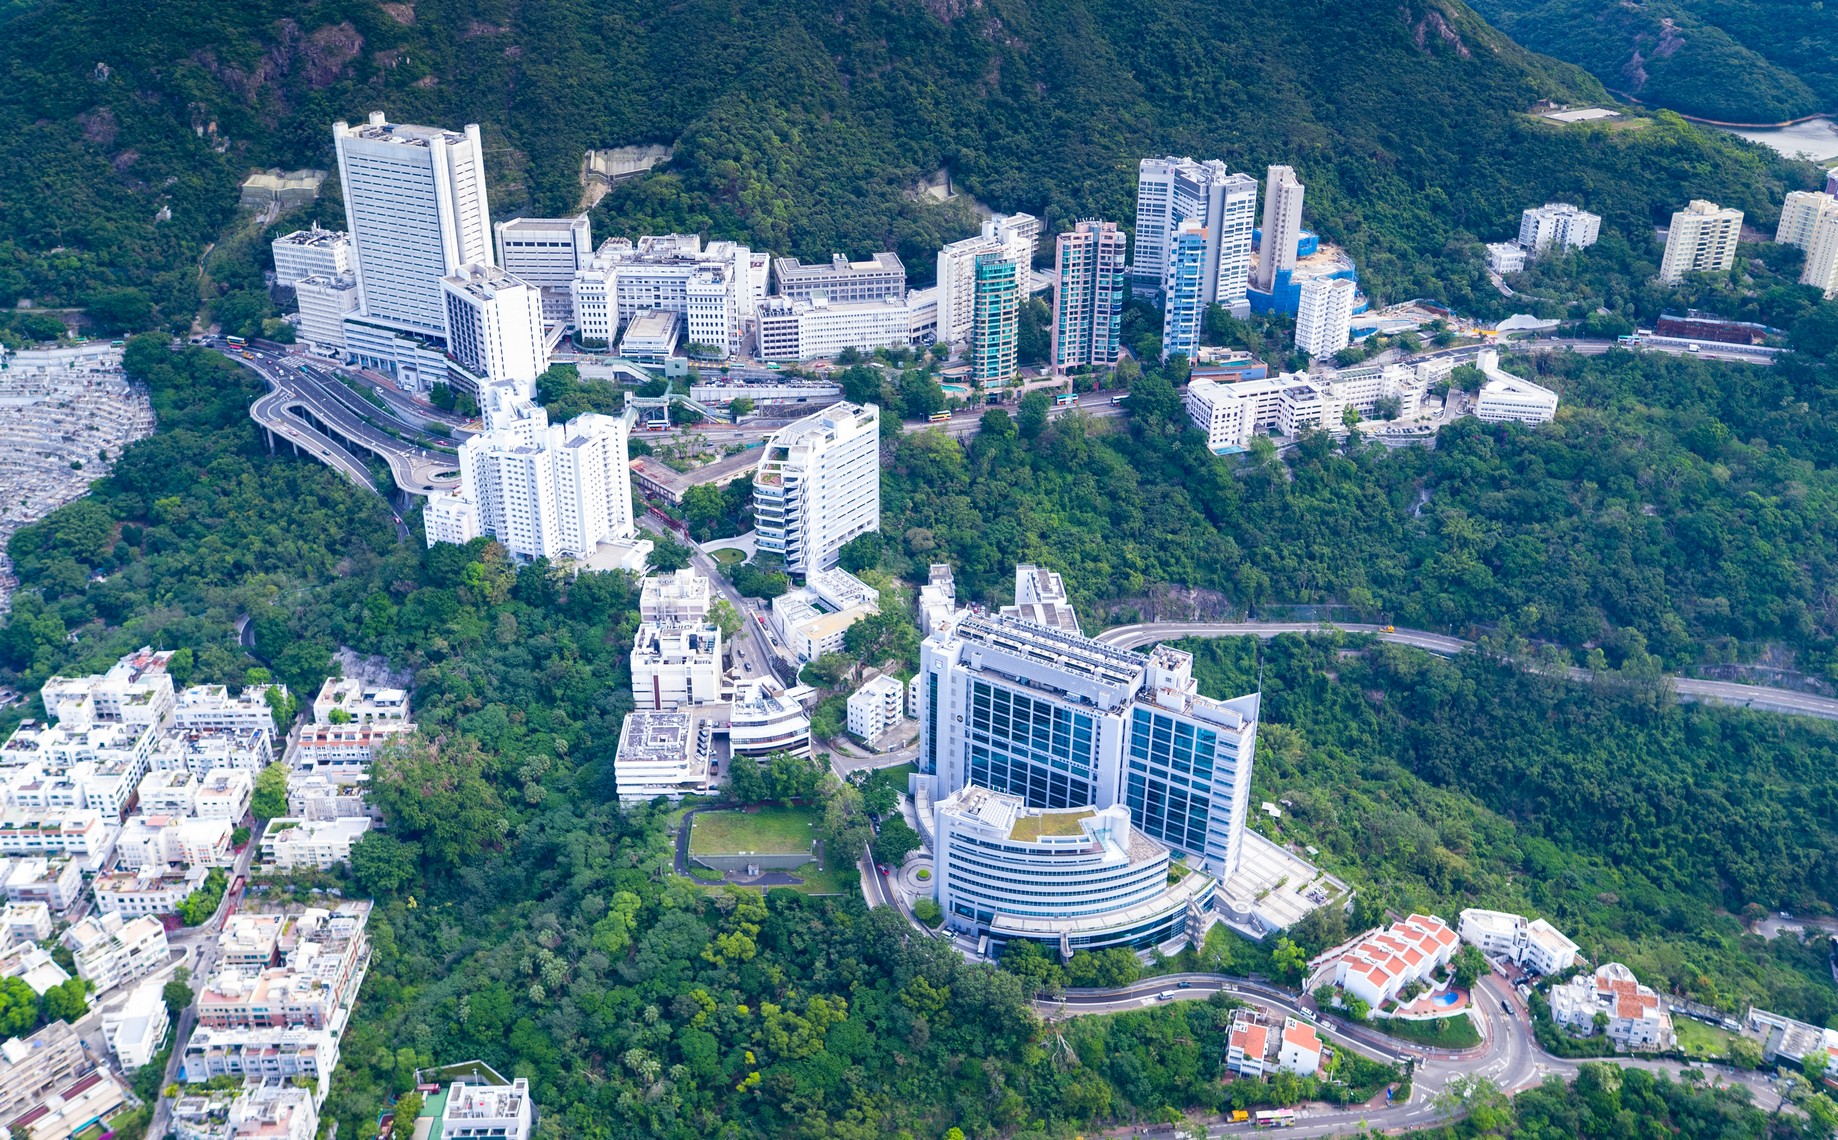 Aerial view of the Medical Campus of HKU.